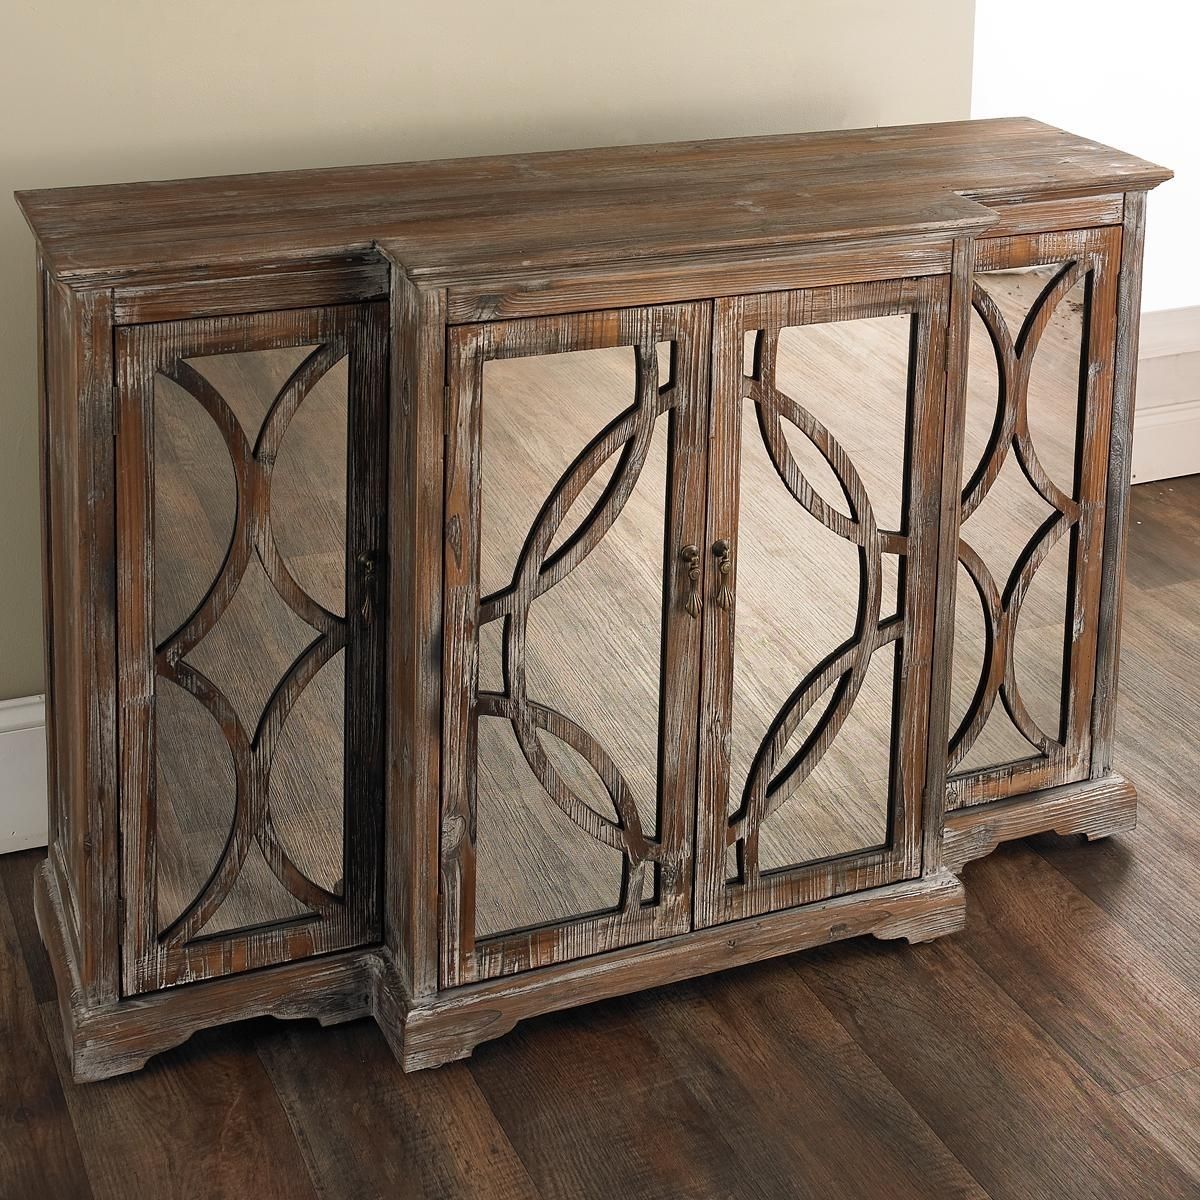 Rustic Mirror Front Sideboard | Accent Furniture | Pinterest Throughout 2 Door Mirror Front Sideboards (Photo 1 of 30)